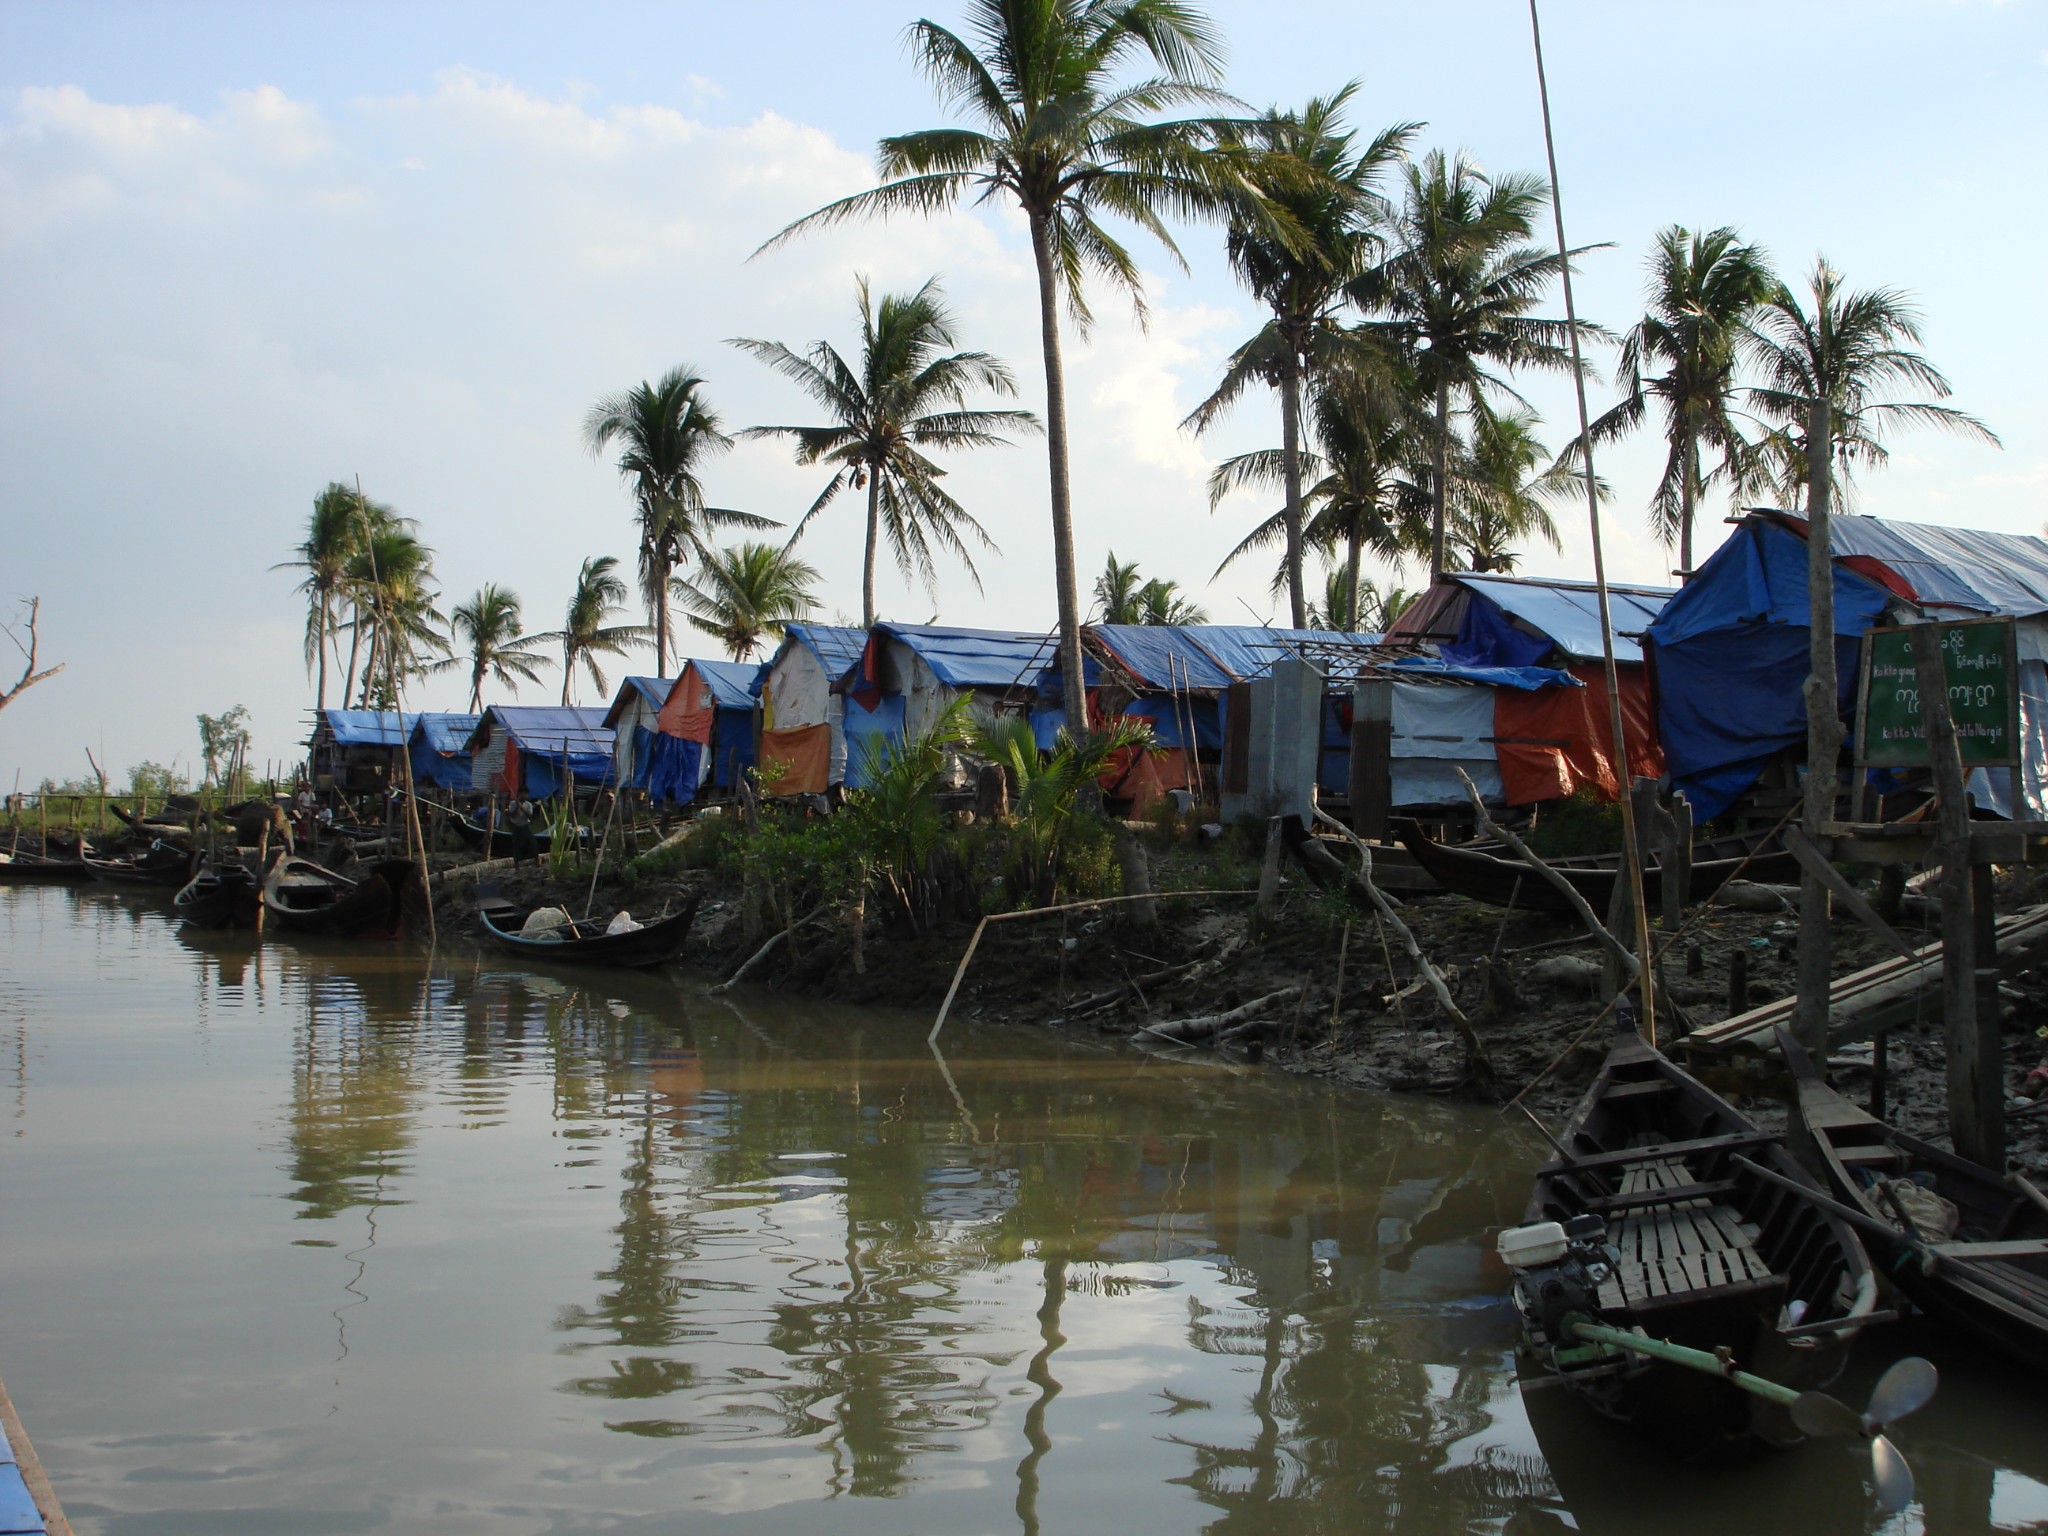 Vulnerability to Climate Change and Gender-Based Violence in the Rohingya Refugee Crisis